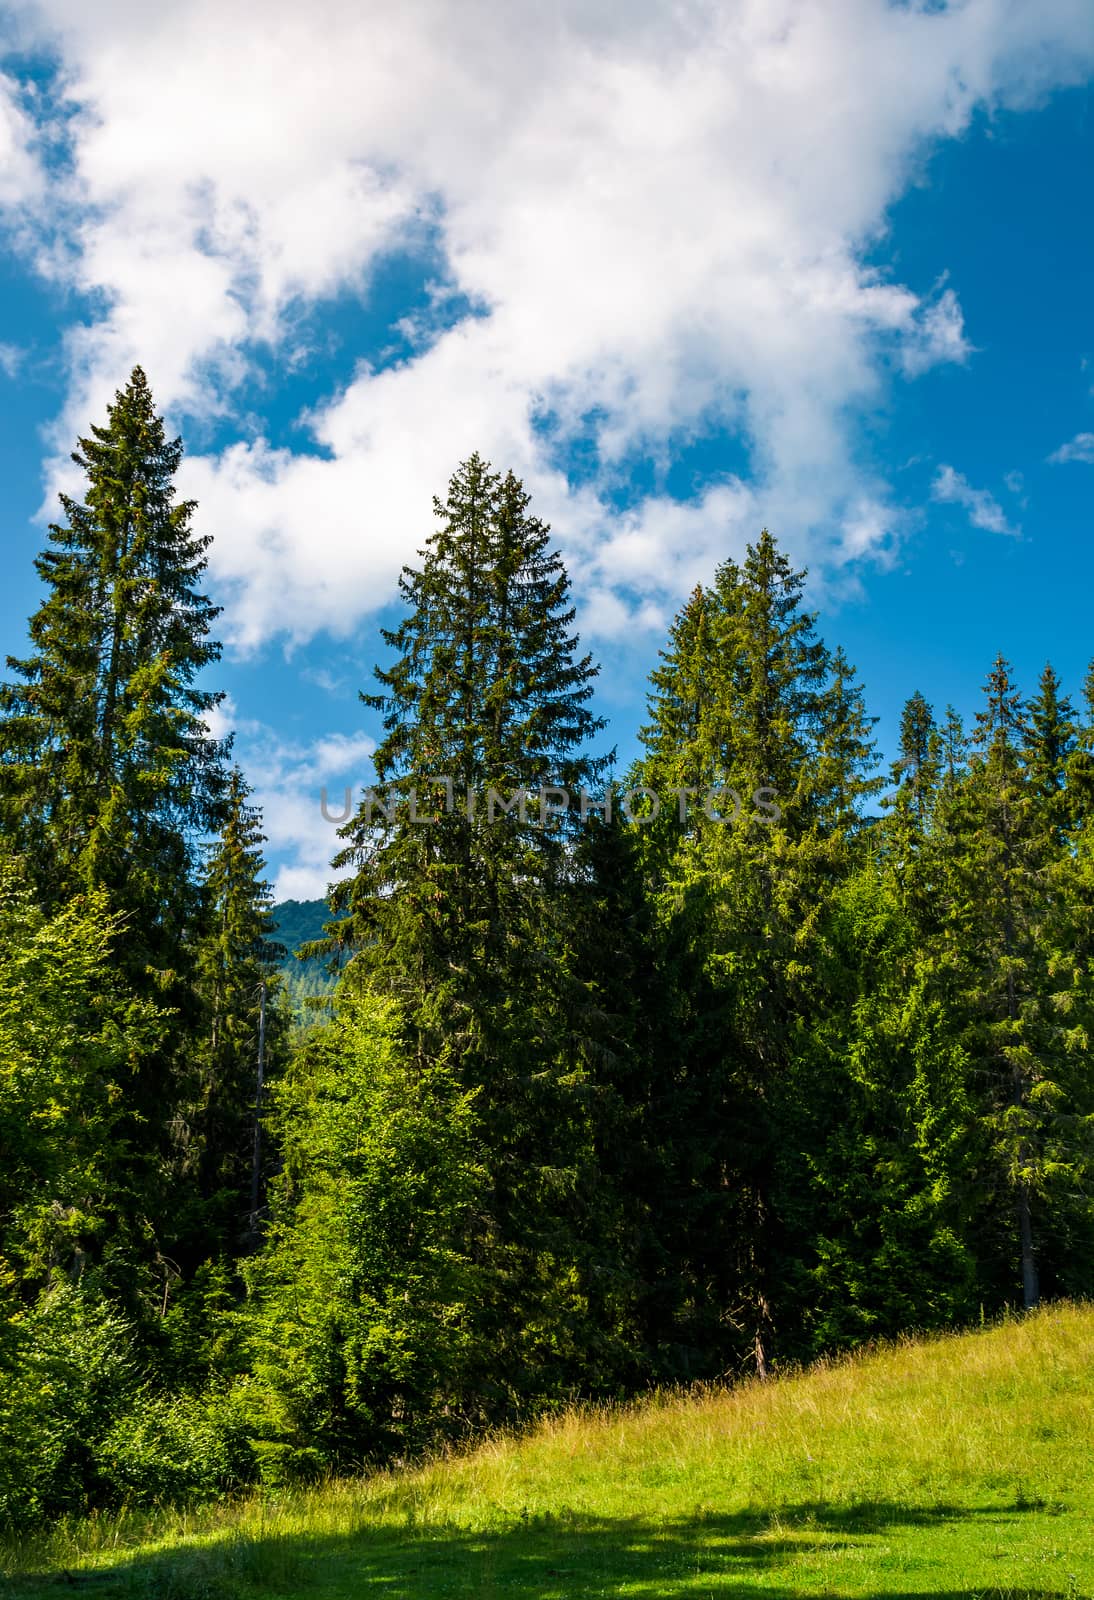 spruce forest on a grassy meadow. lovely summer scenery